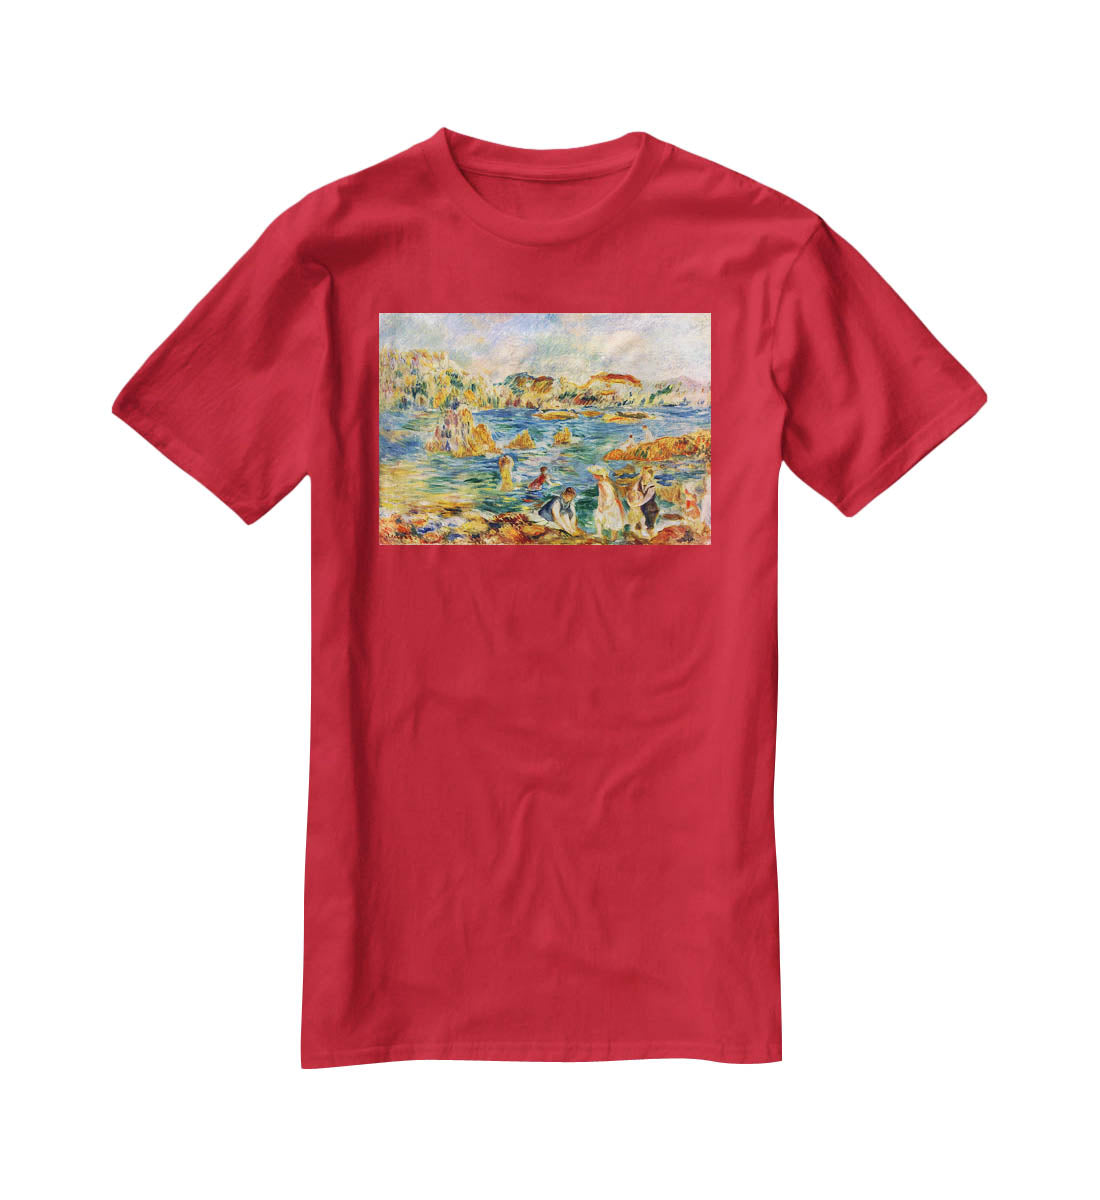 At the beach of Guernesey by Renoir T-Shirt - Canvas Art Rocks - 4